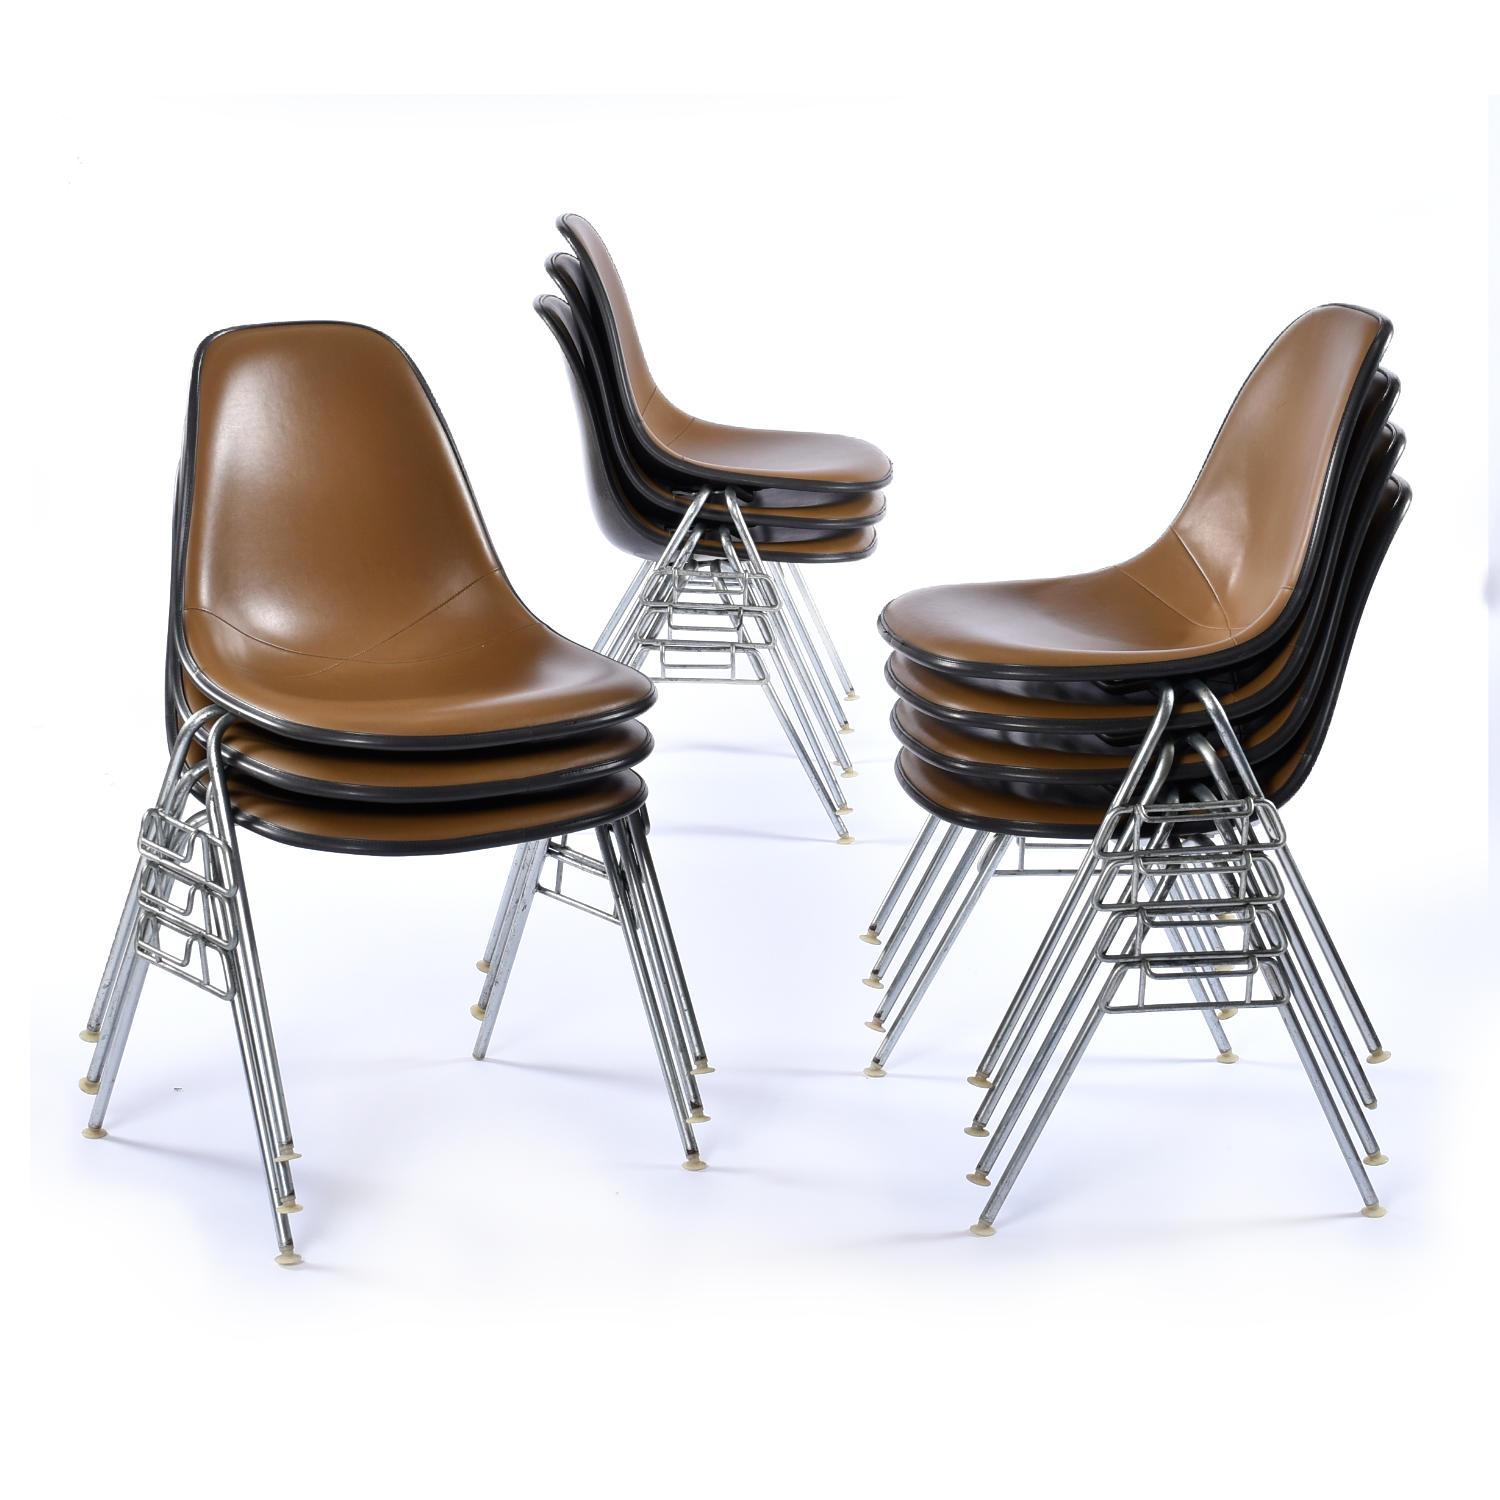 Sold as a group of 10. We have 20 chairs available. Contact us if you need a custom quantity.

Eames stackable fiberglass shell chairs with original brown naugahyde pads. The famous Charles and Ray Eames fiberglass shell chairs are outfitted with